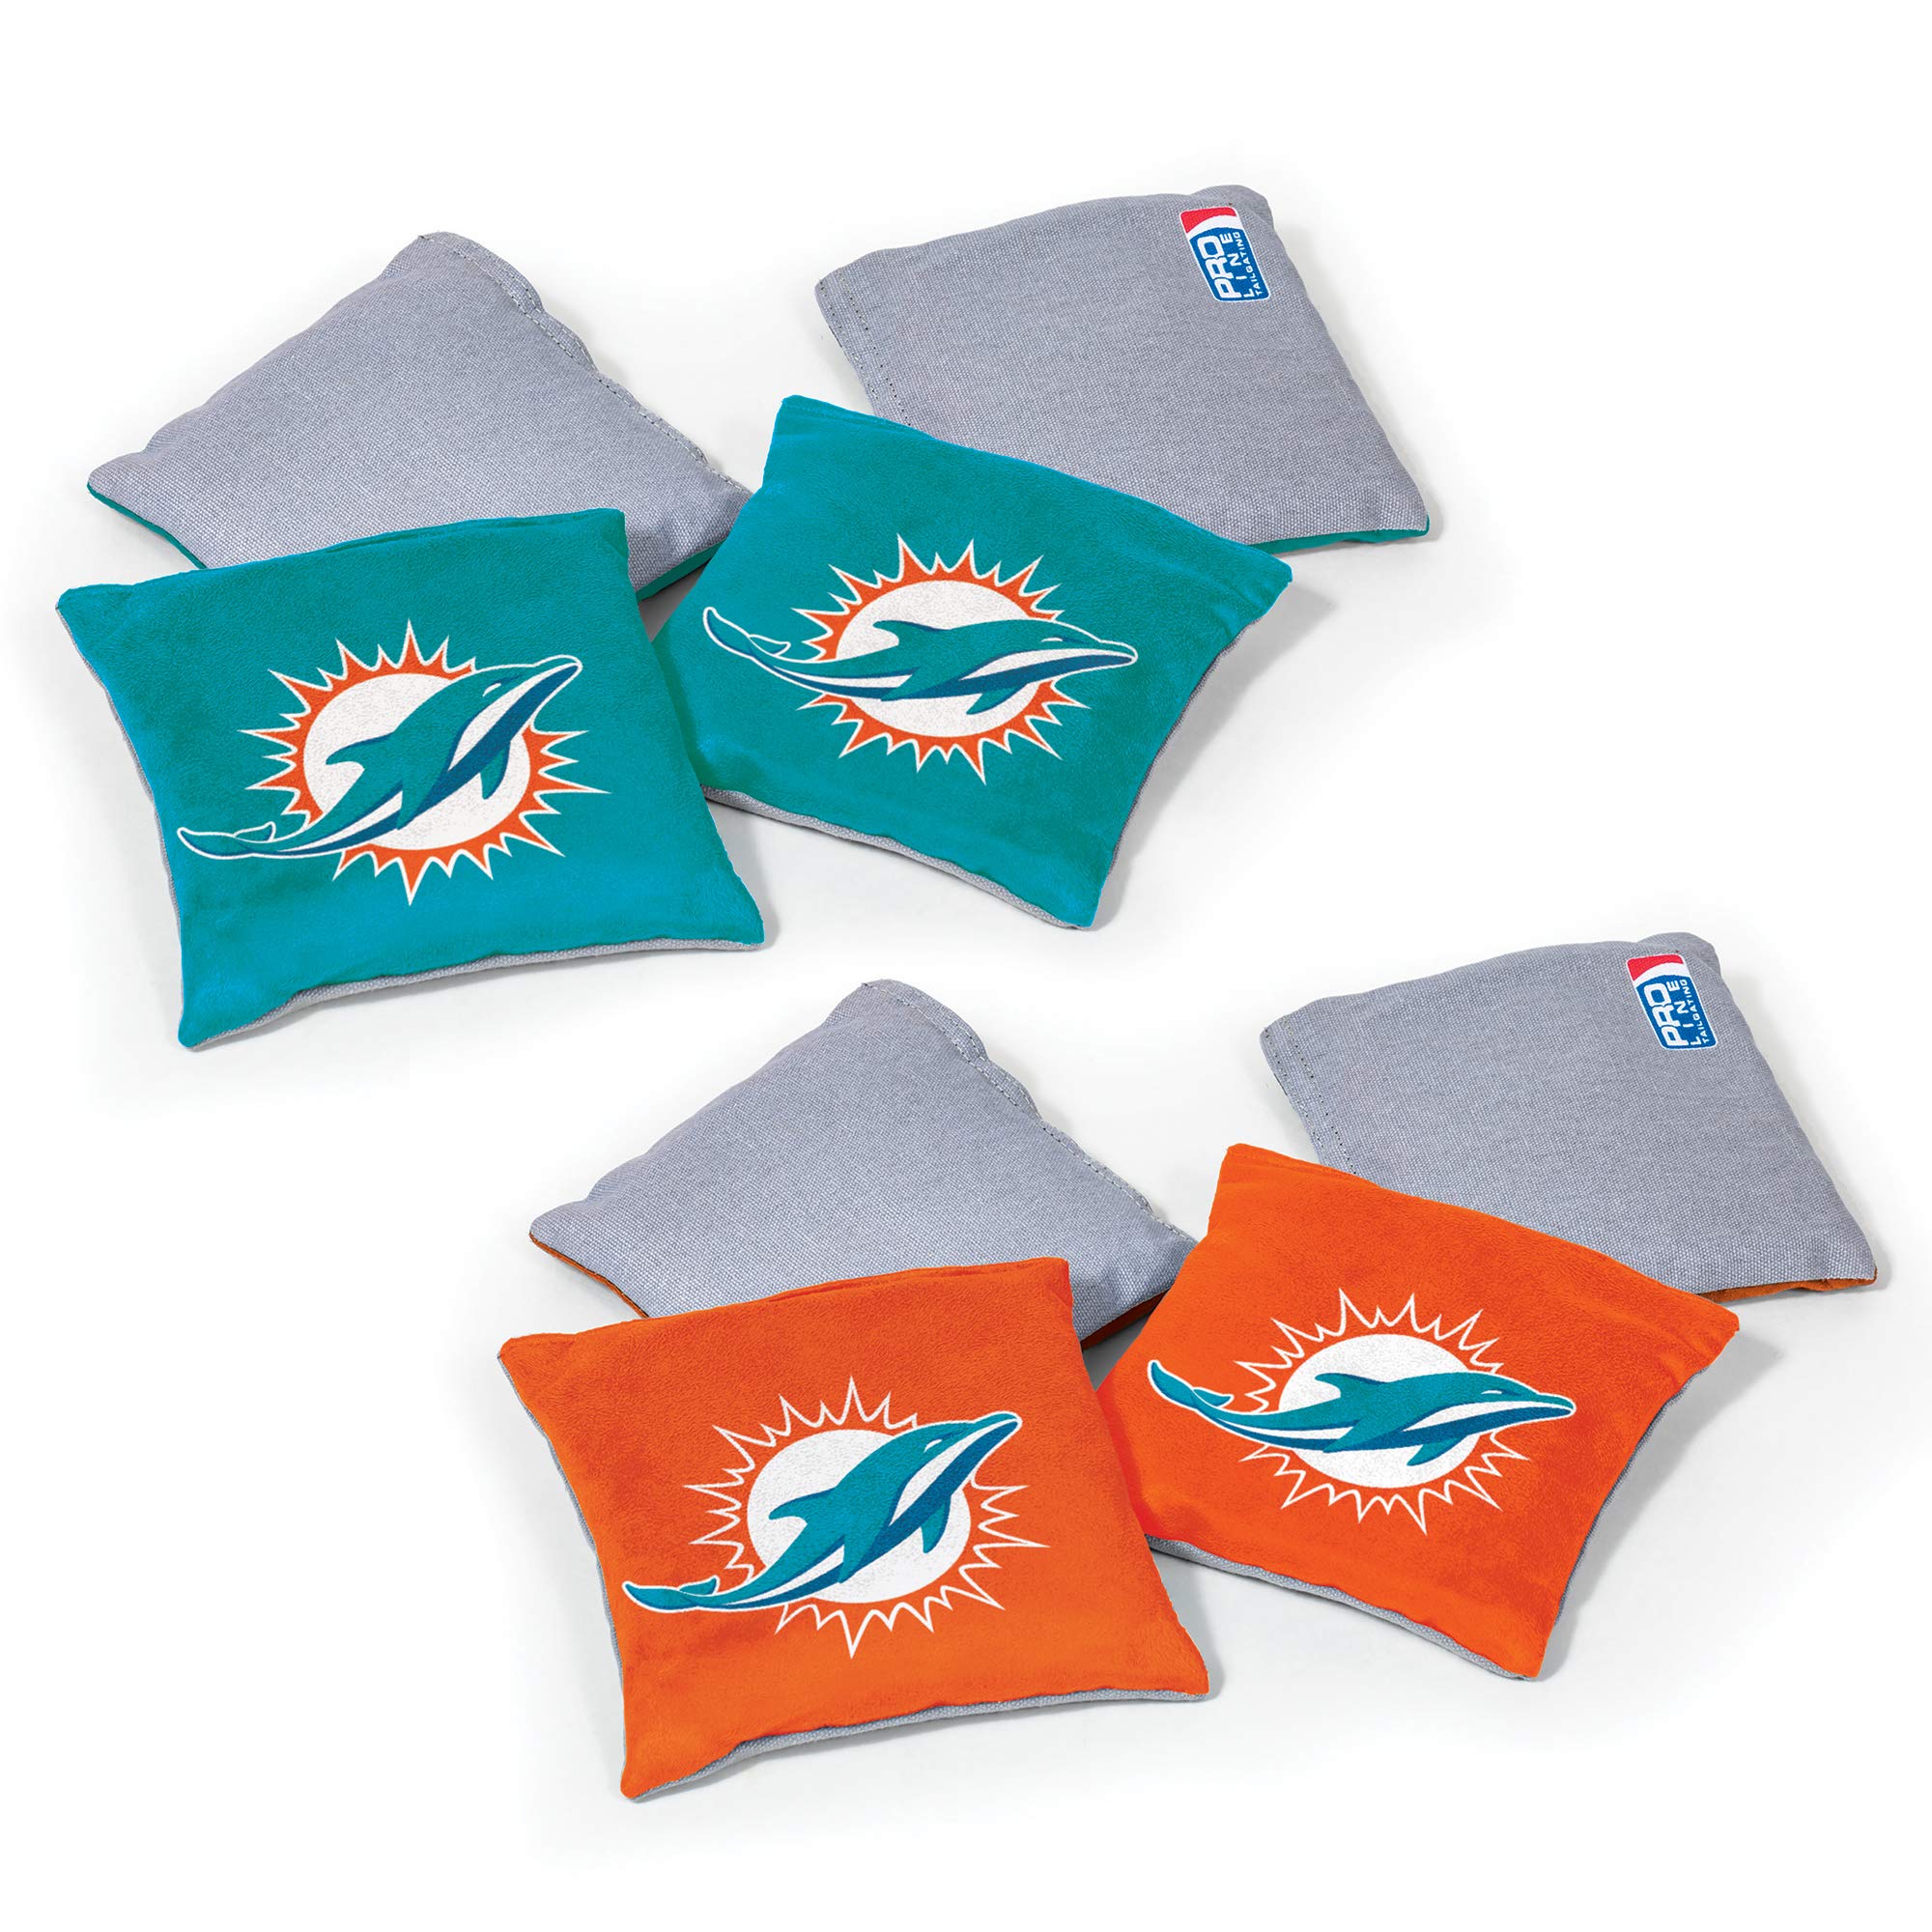 Wild Sports Nfl Miami Dolphins 8Pk Dual Sided Bean Bags, Team Color